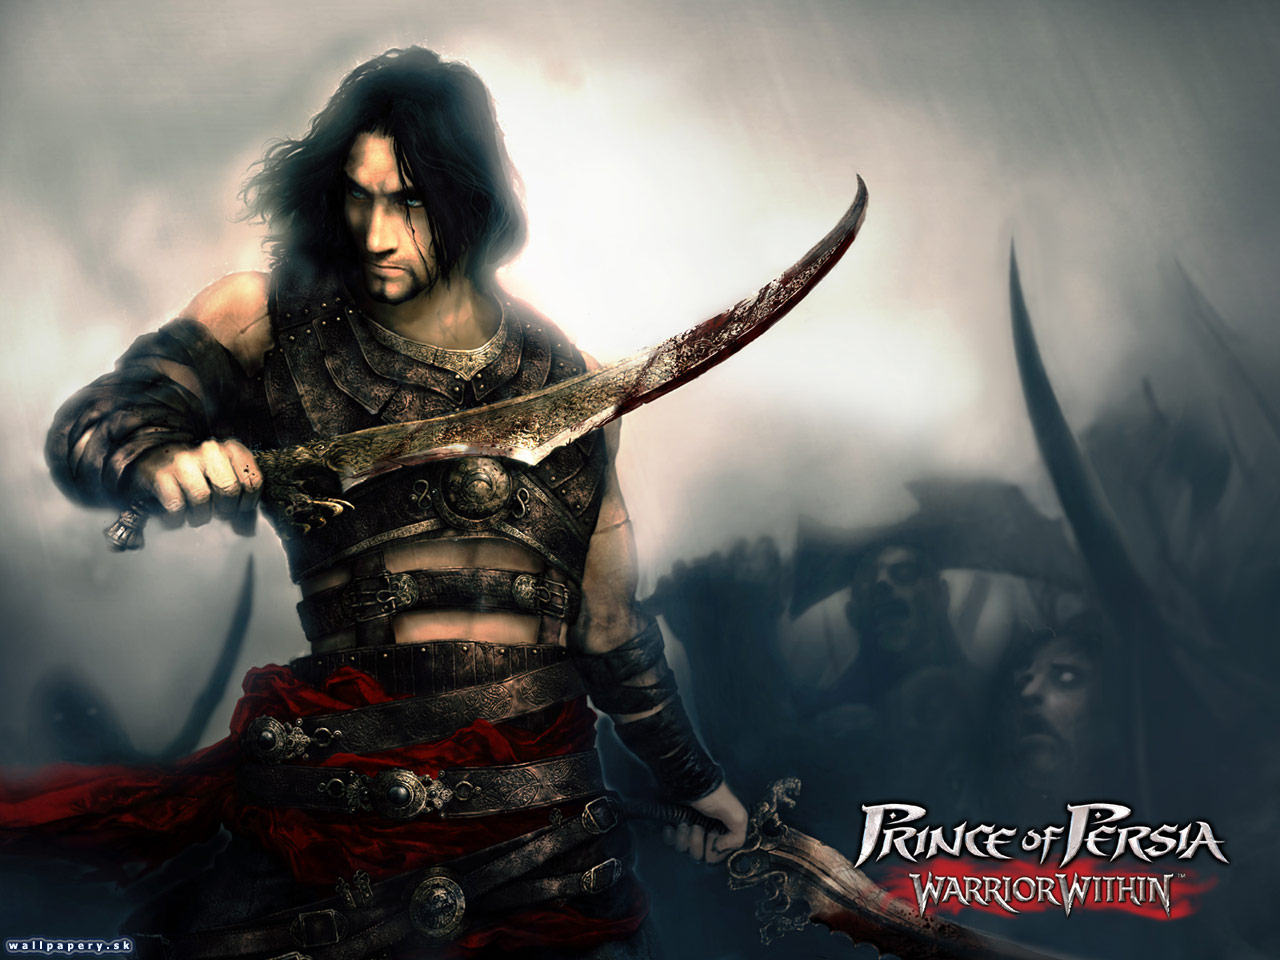 Prince of Persia: Warrior Within - wallpaper 10